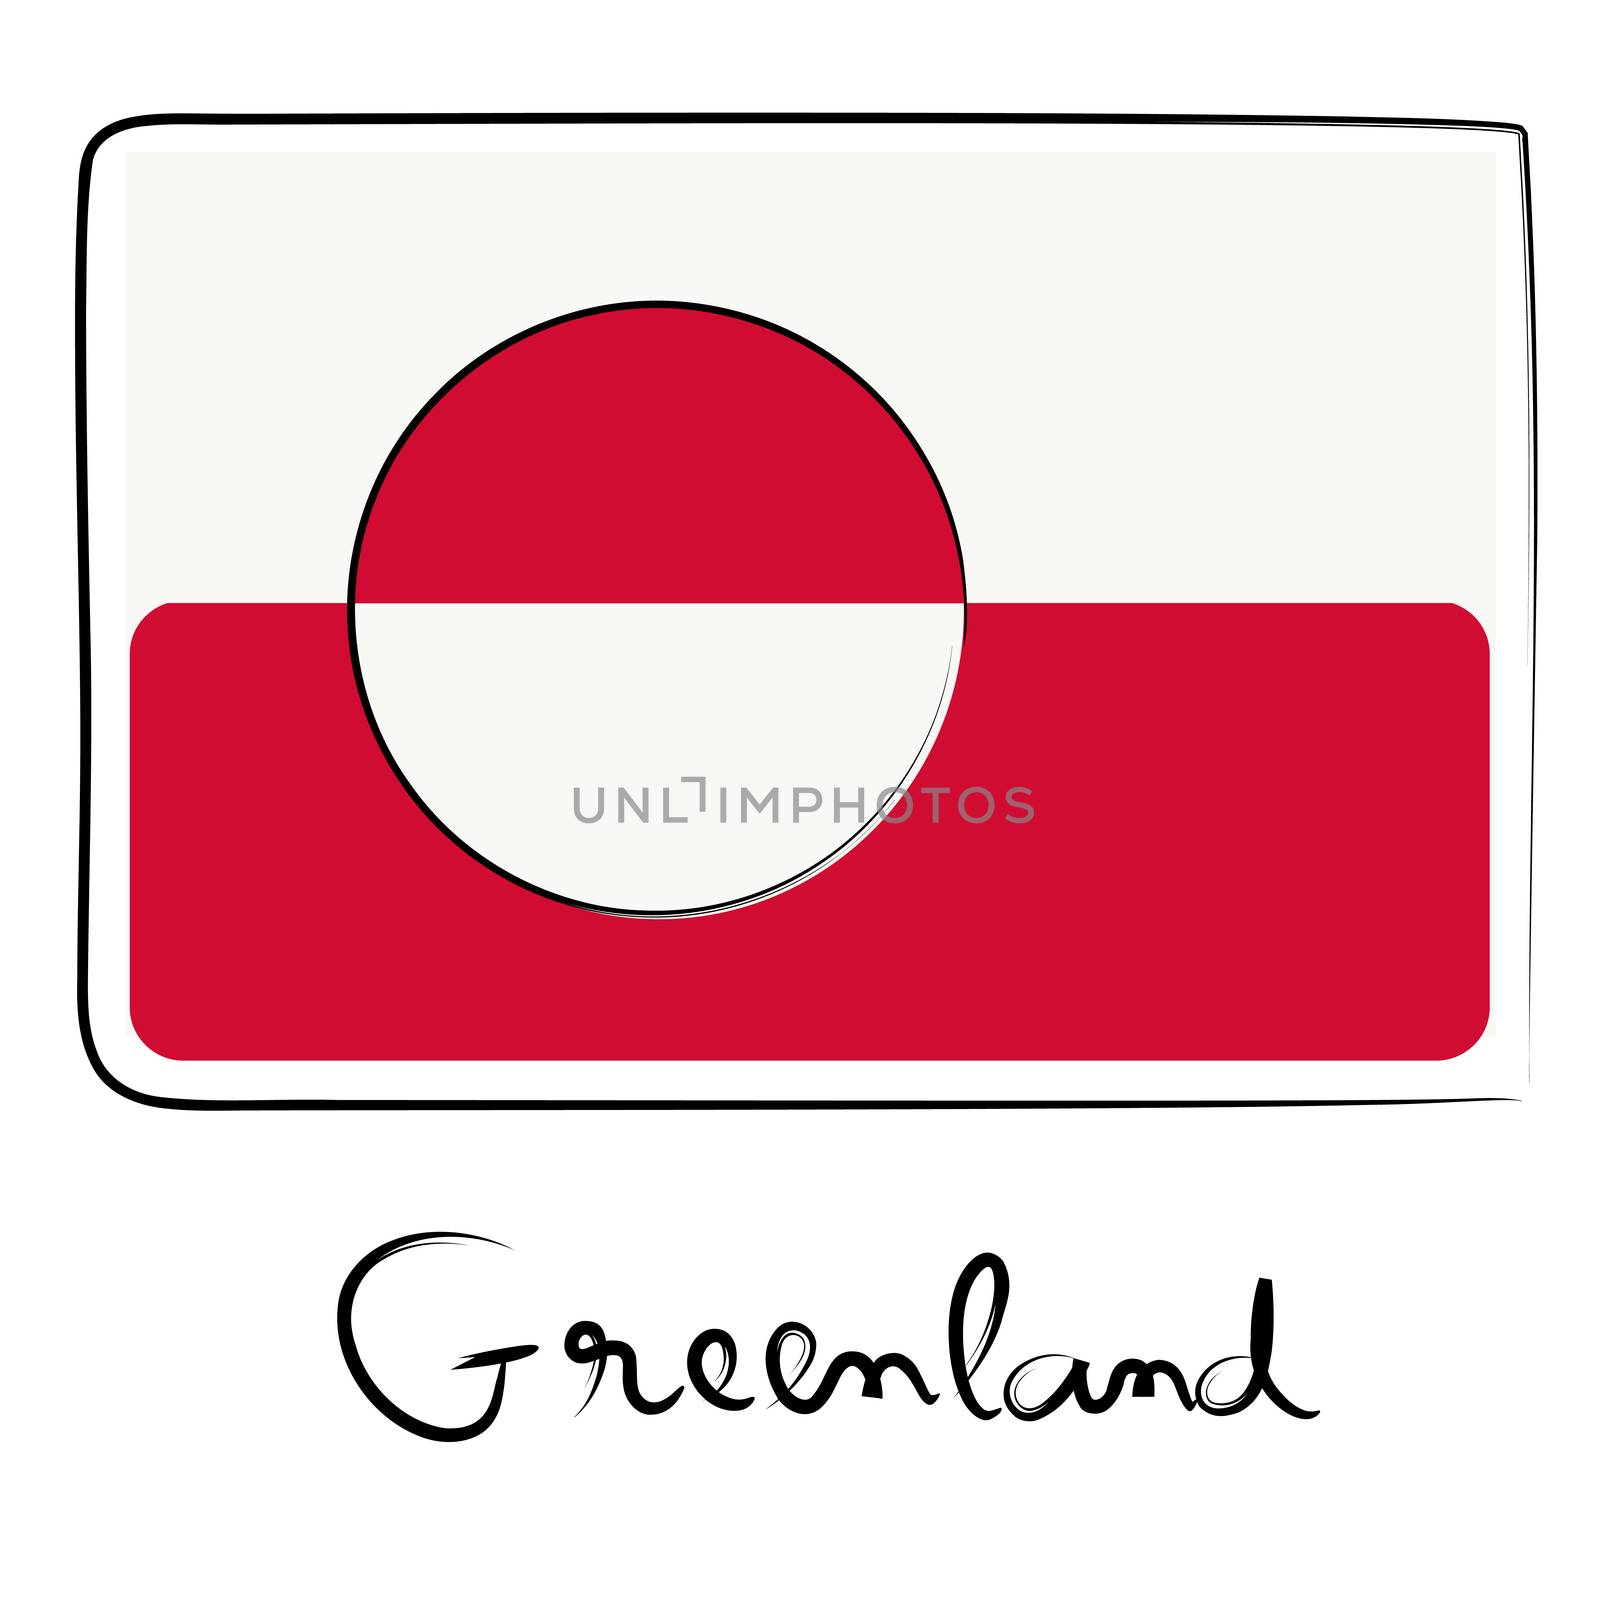 Greenland country flag doodle with title text isolated on white